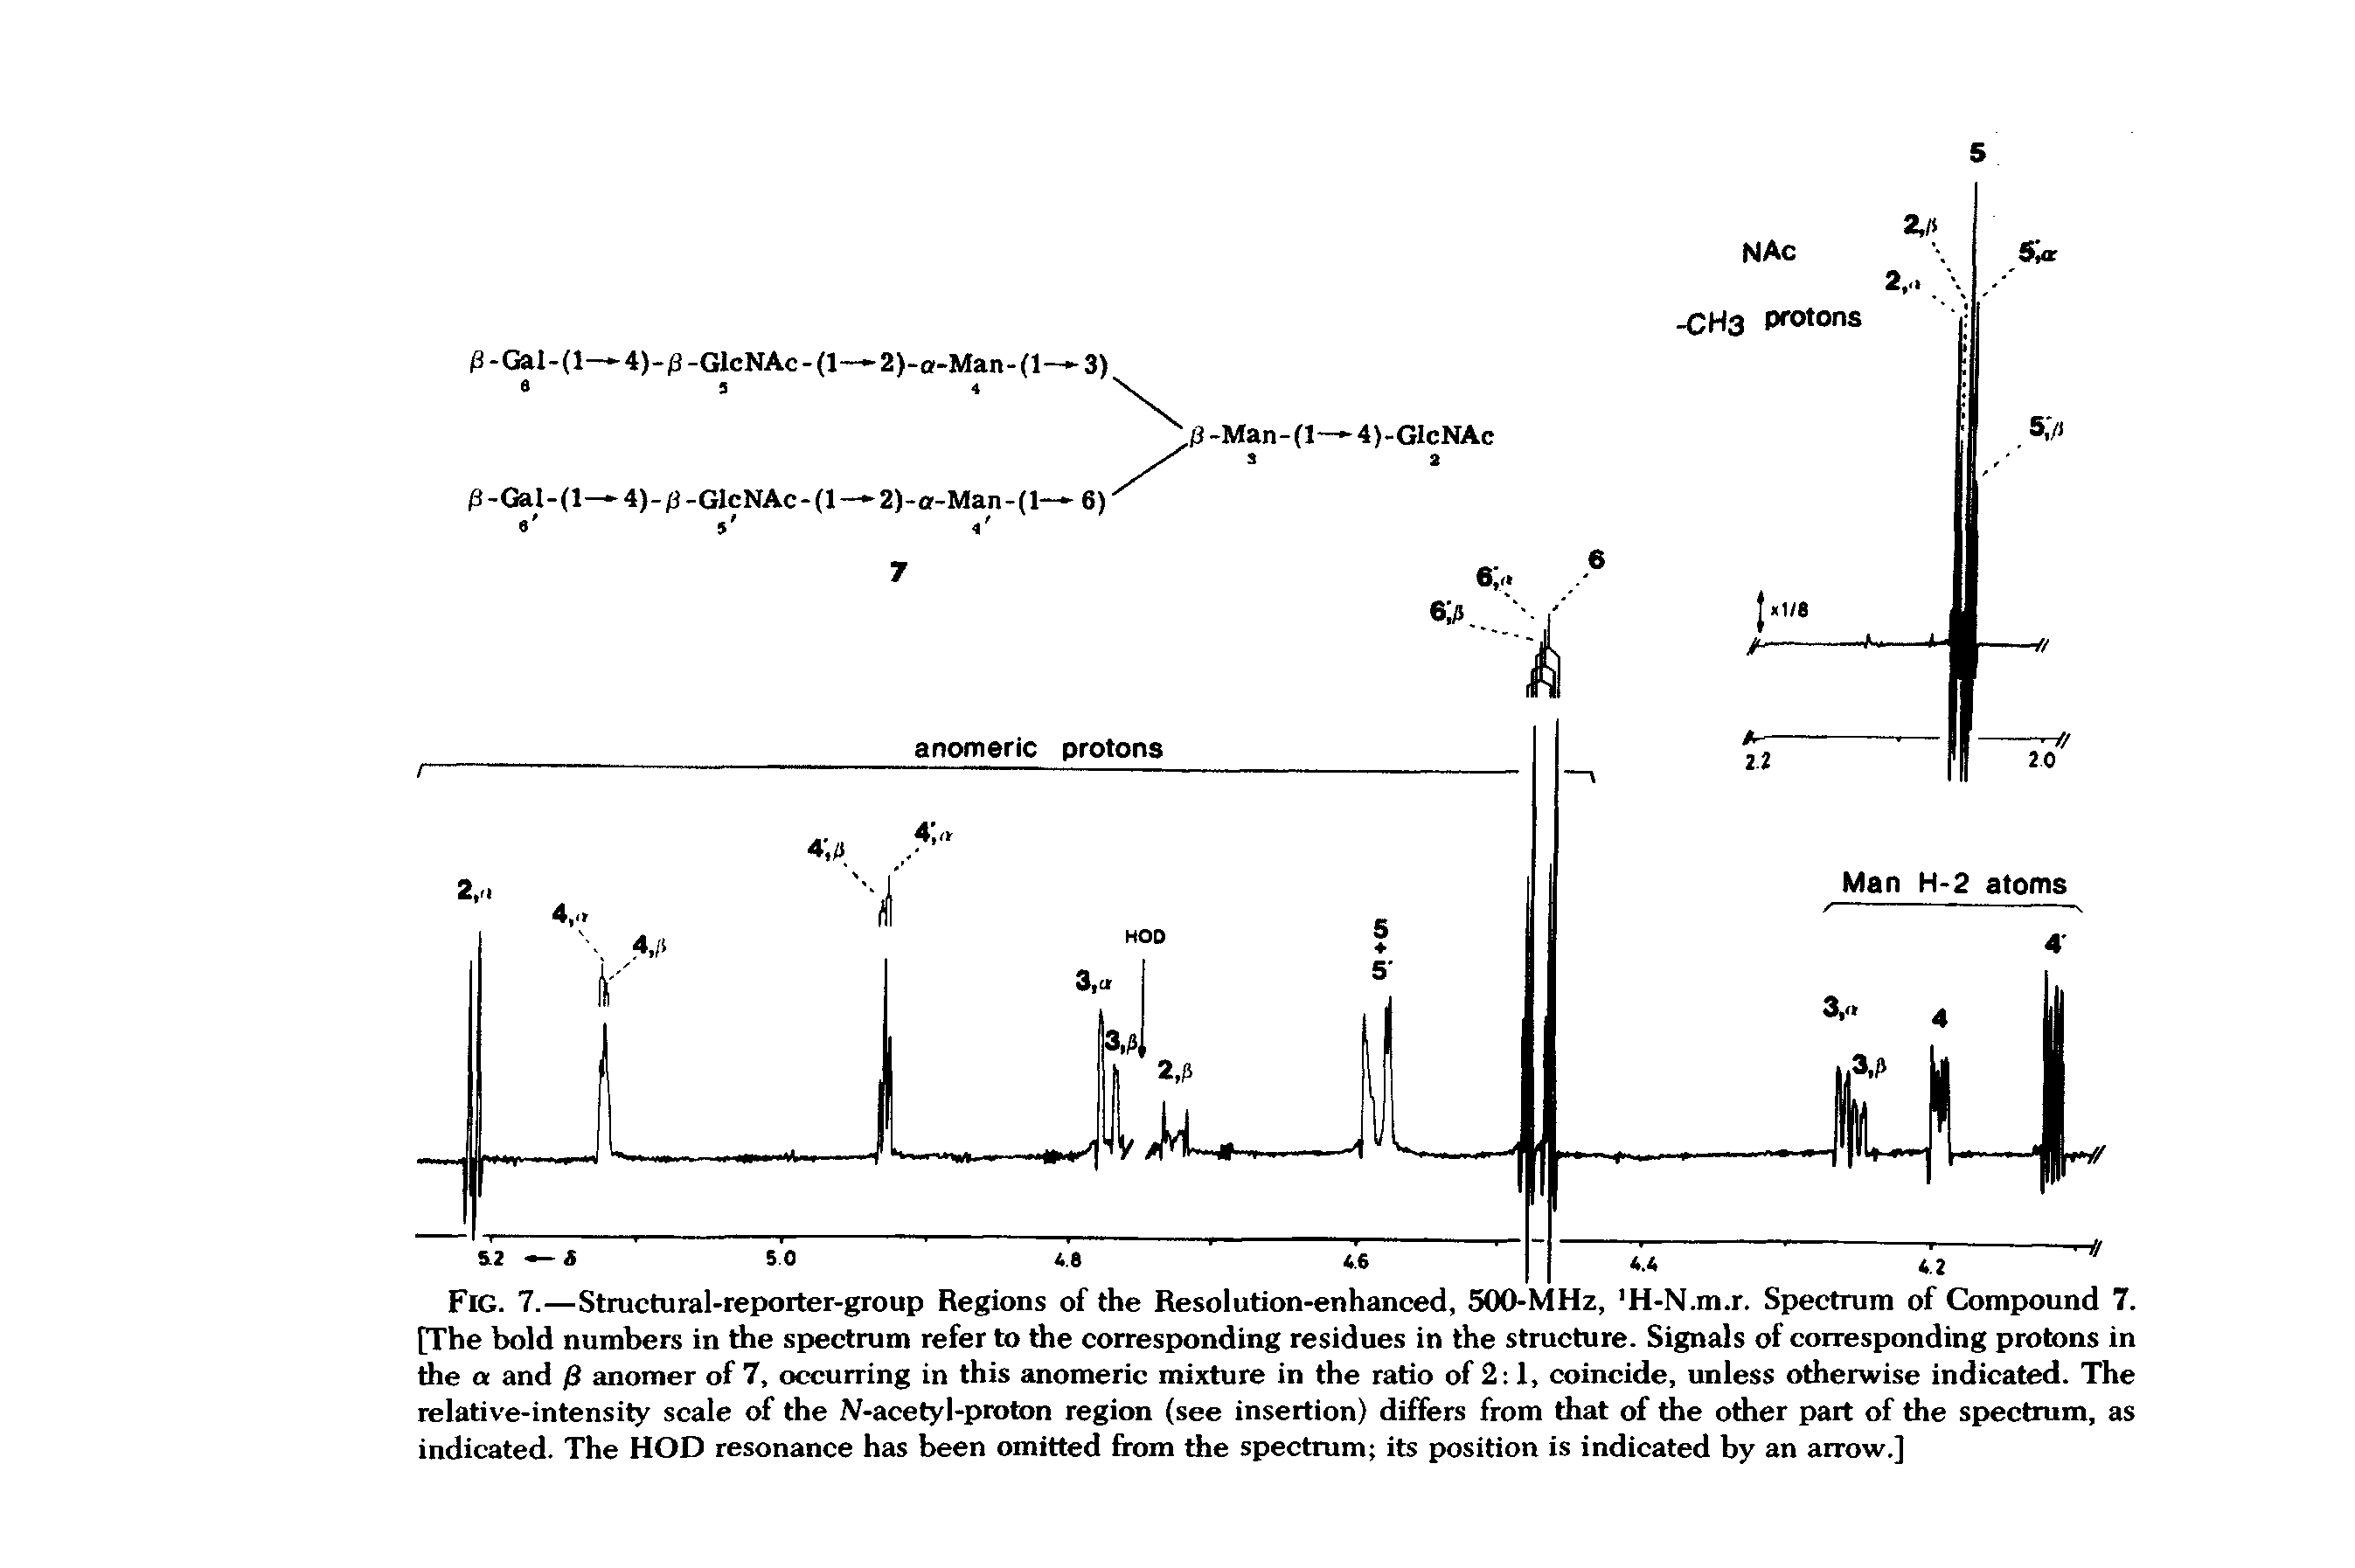 Fig. 7.—Structural-reporter-group Regions of the Resolution-enhanced, 500-MHz, H-N.m.r. Spectrum of Compound 7. [The bold numbers in the spectrum refer to the corresponding residues in the structure. Signals of corresponding protons in the a and anomer of 7, occurring in this anomeric mixture in the ratio of 2 1, coincide, unless otherwise indicated. The relative-intensity scale of the N-acety 1-proton region (see insertion) differs from that of the other part of the spectrum, as indicated. The HOD resonance has been omitted from the spectrum its position is indicated by an arrow.]...